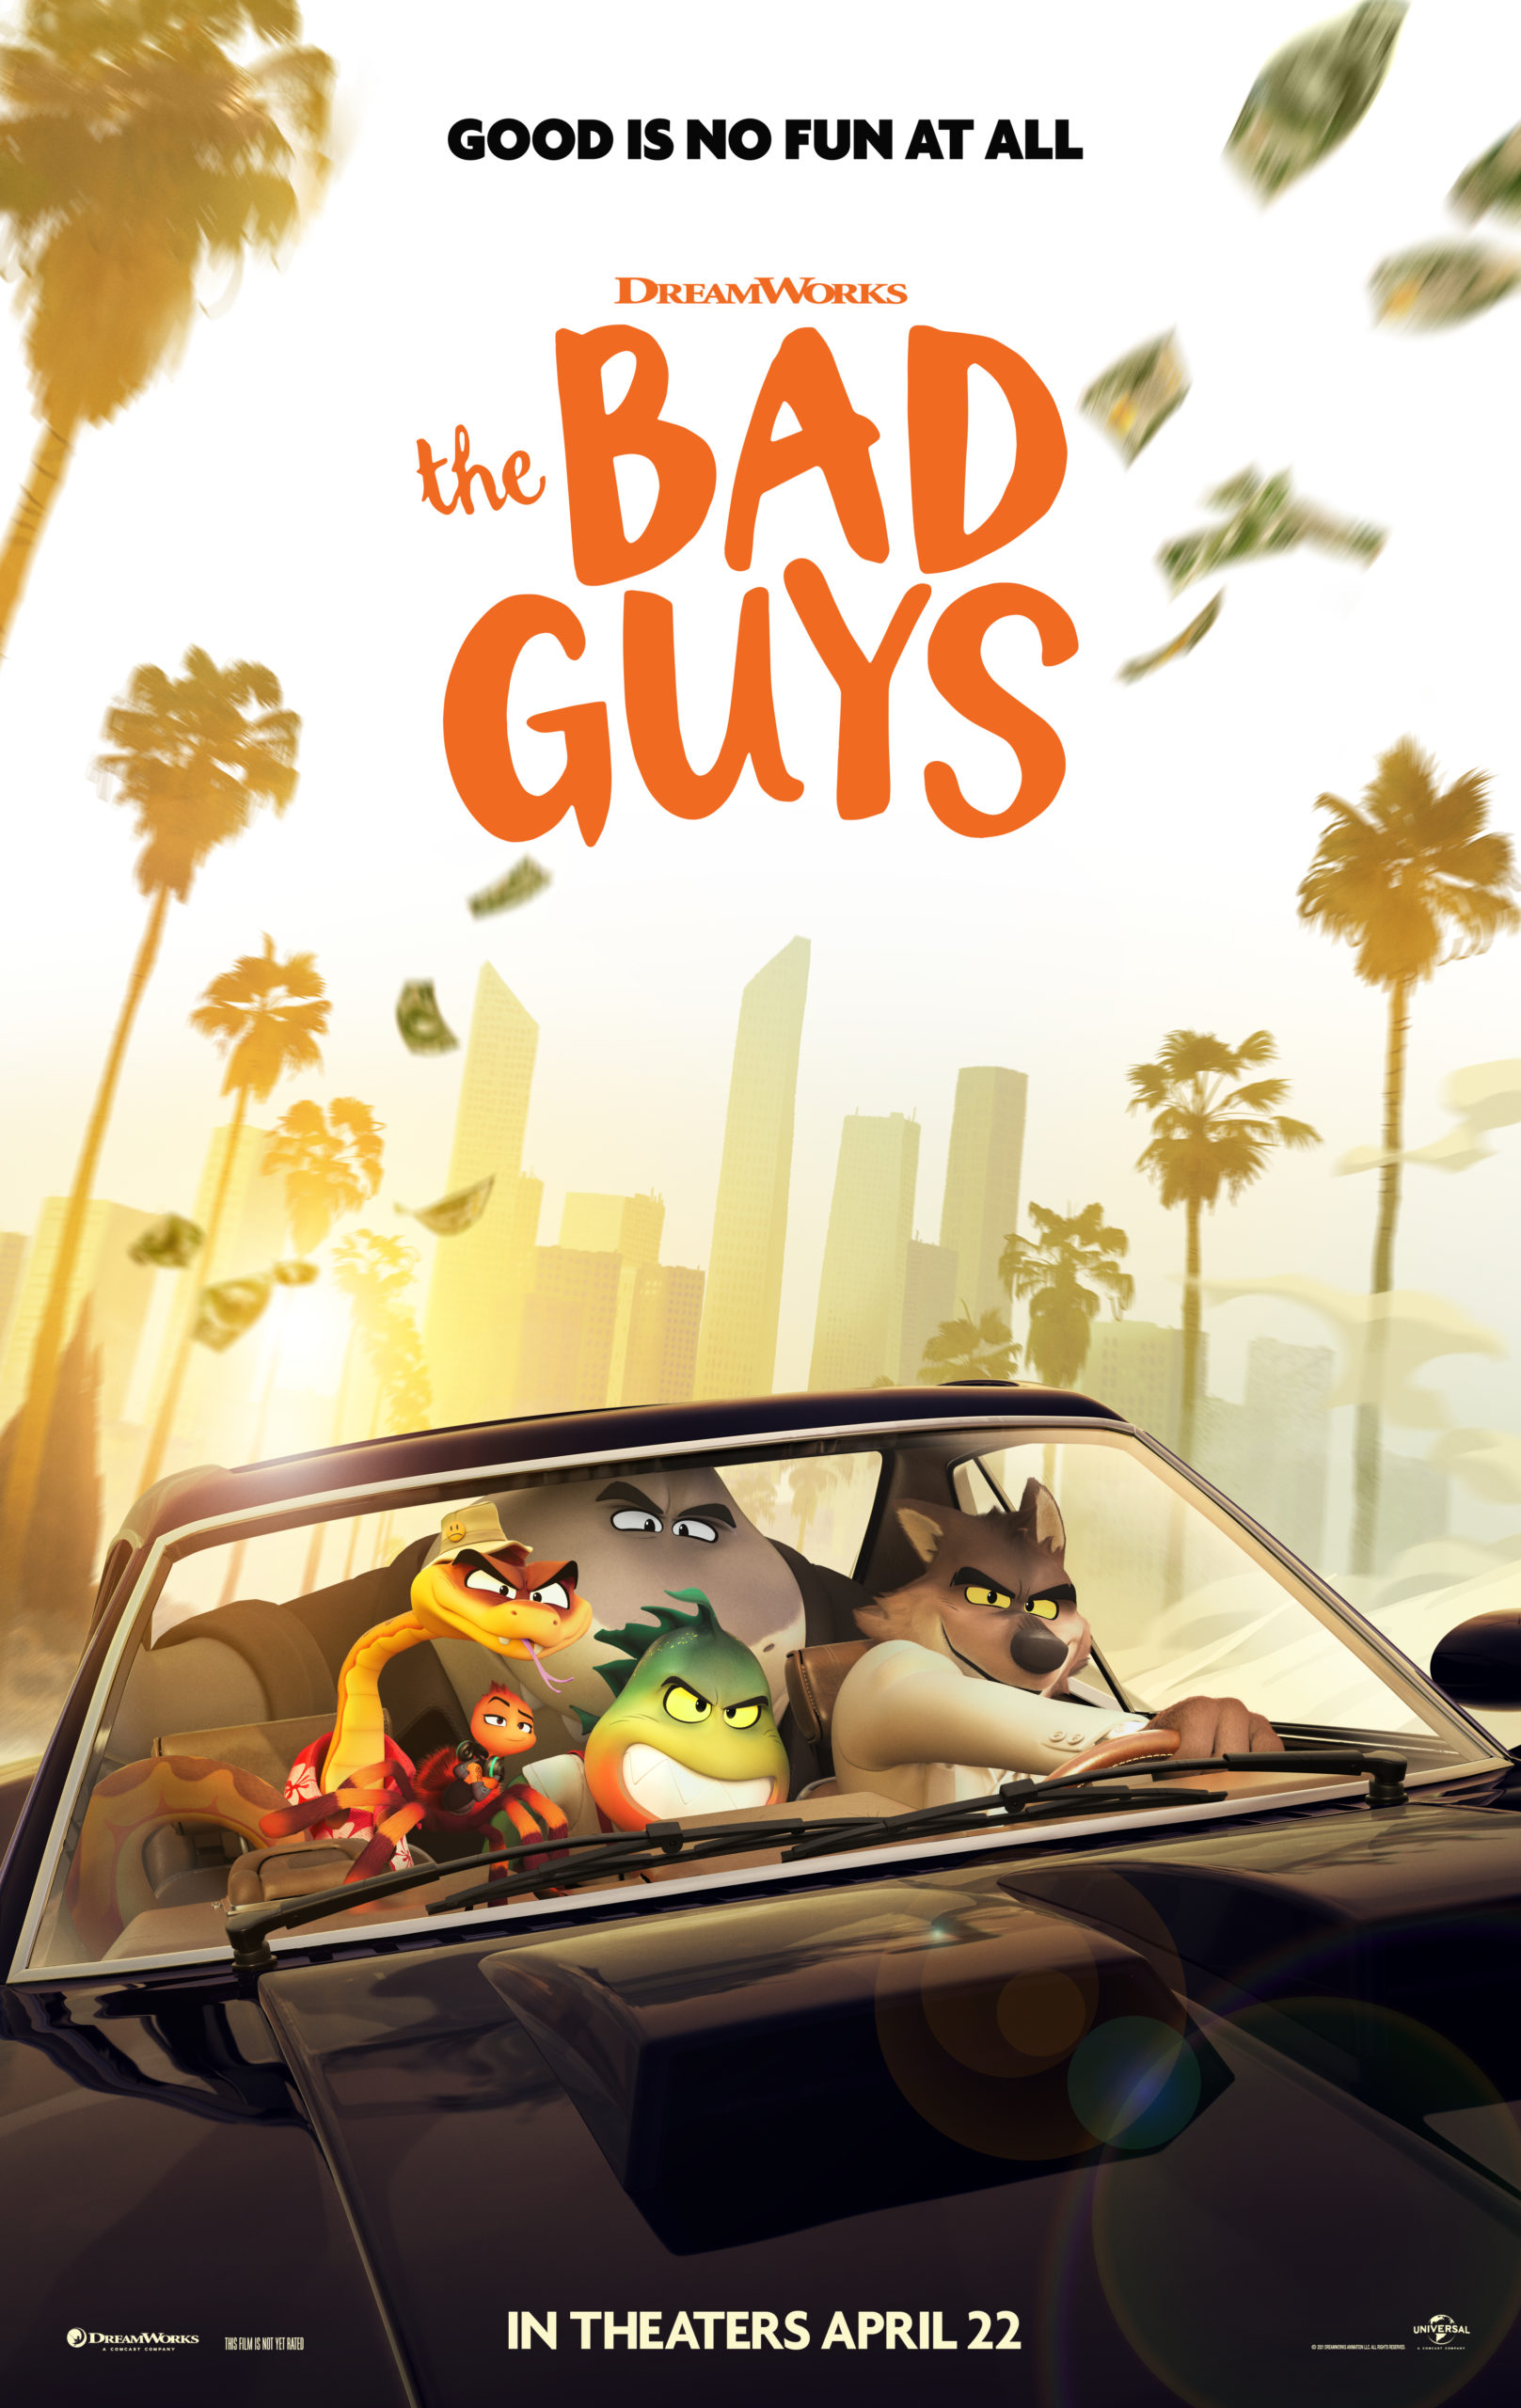 The Bad Guys Movie Review